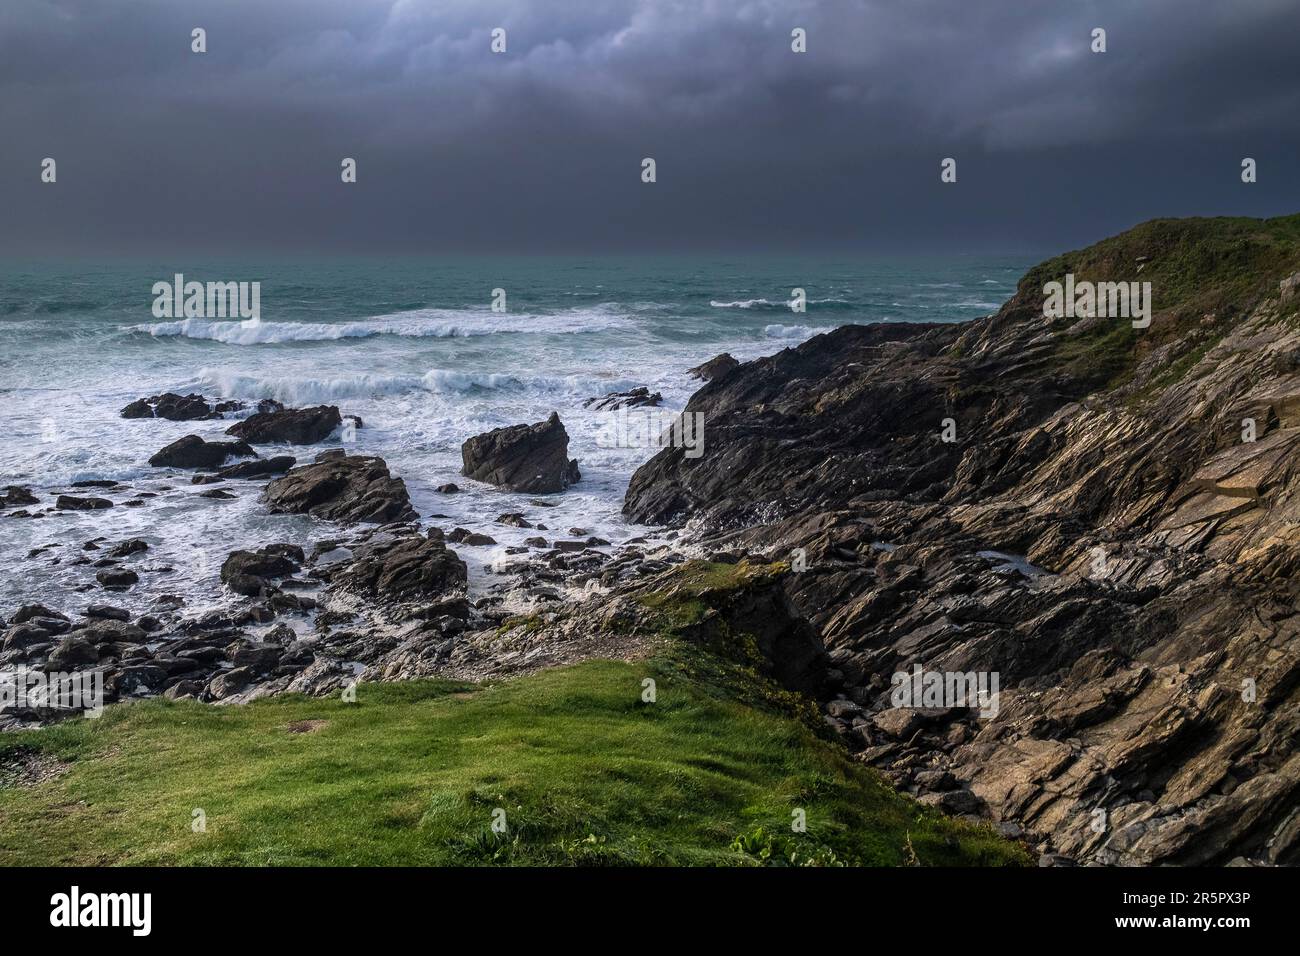 Storm Claudio approaching Towan Head over Newquay Bay in Cornwall in England in the UK. Stock Photo